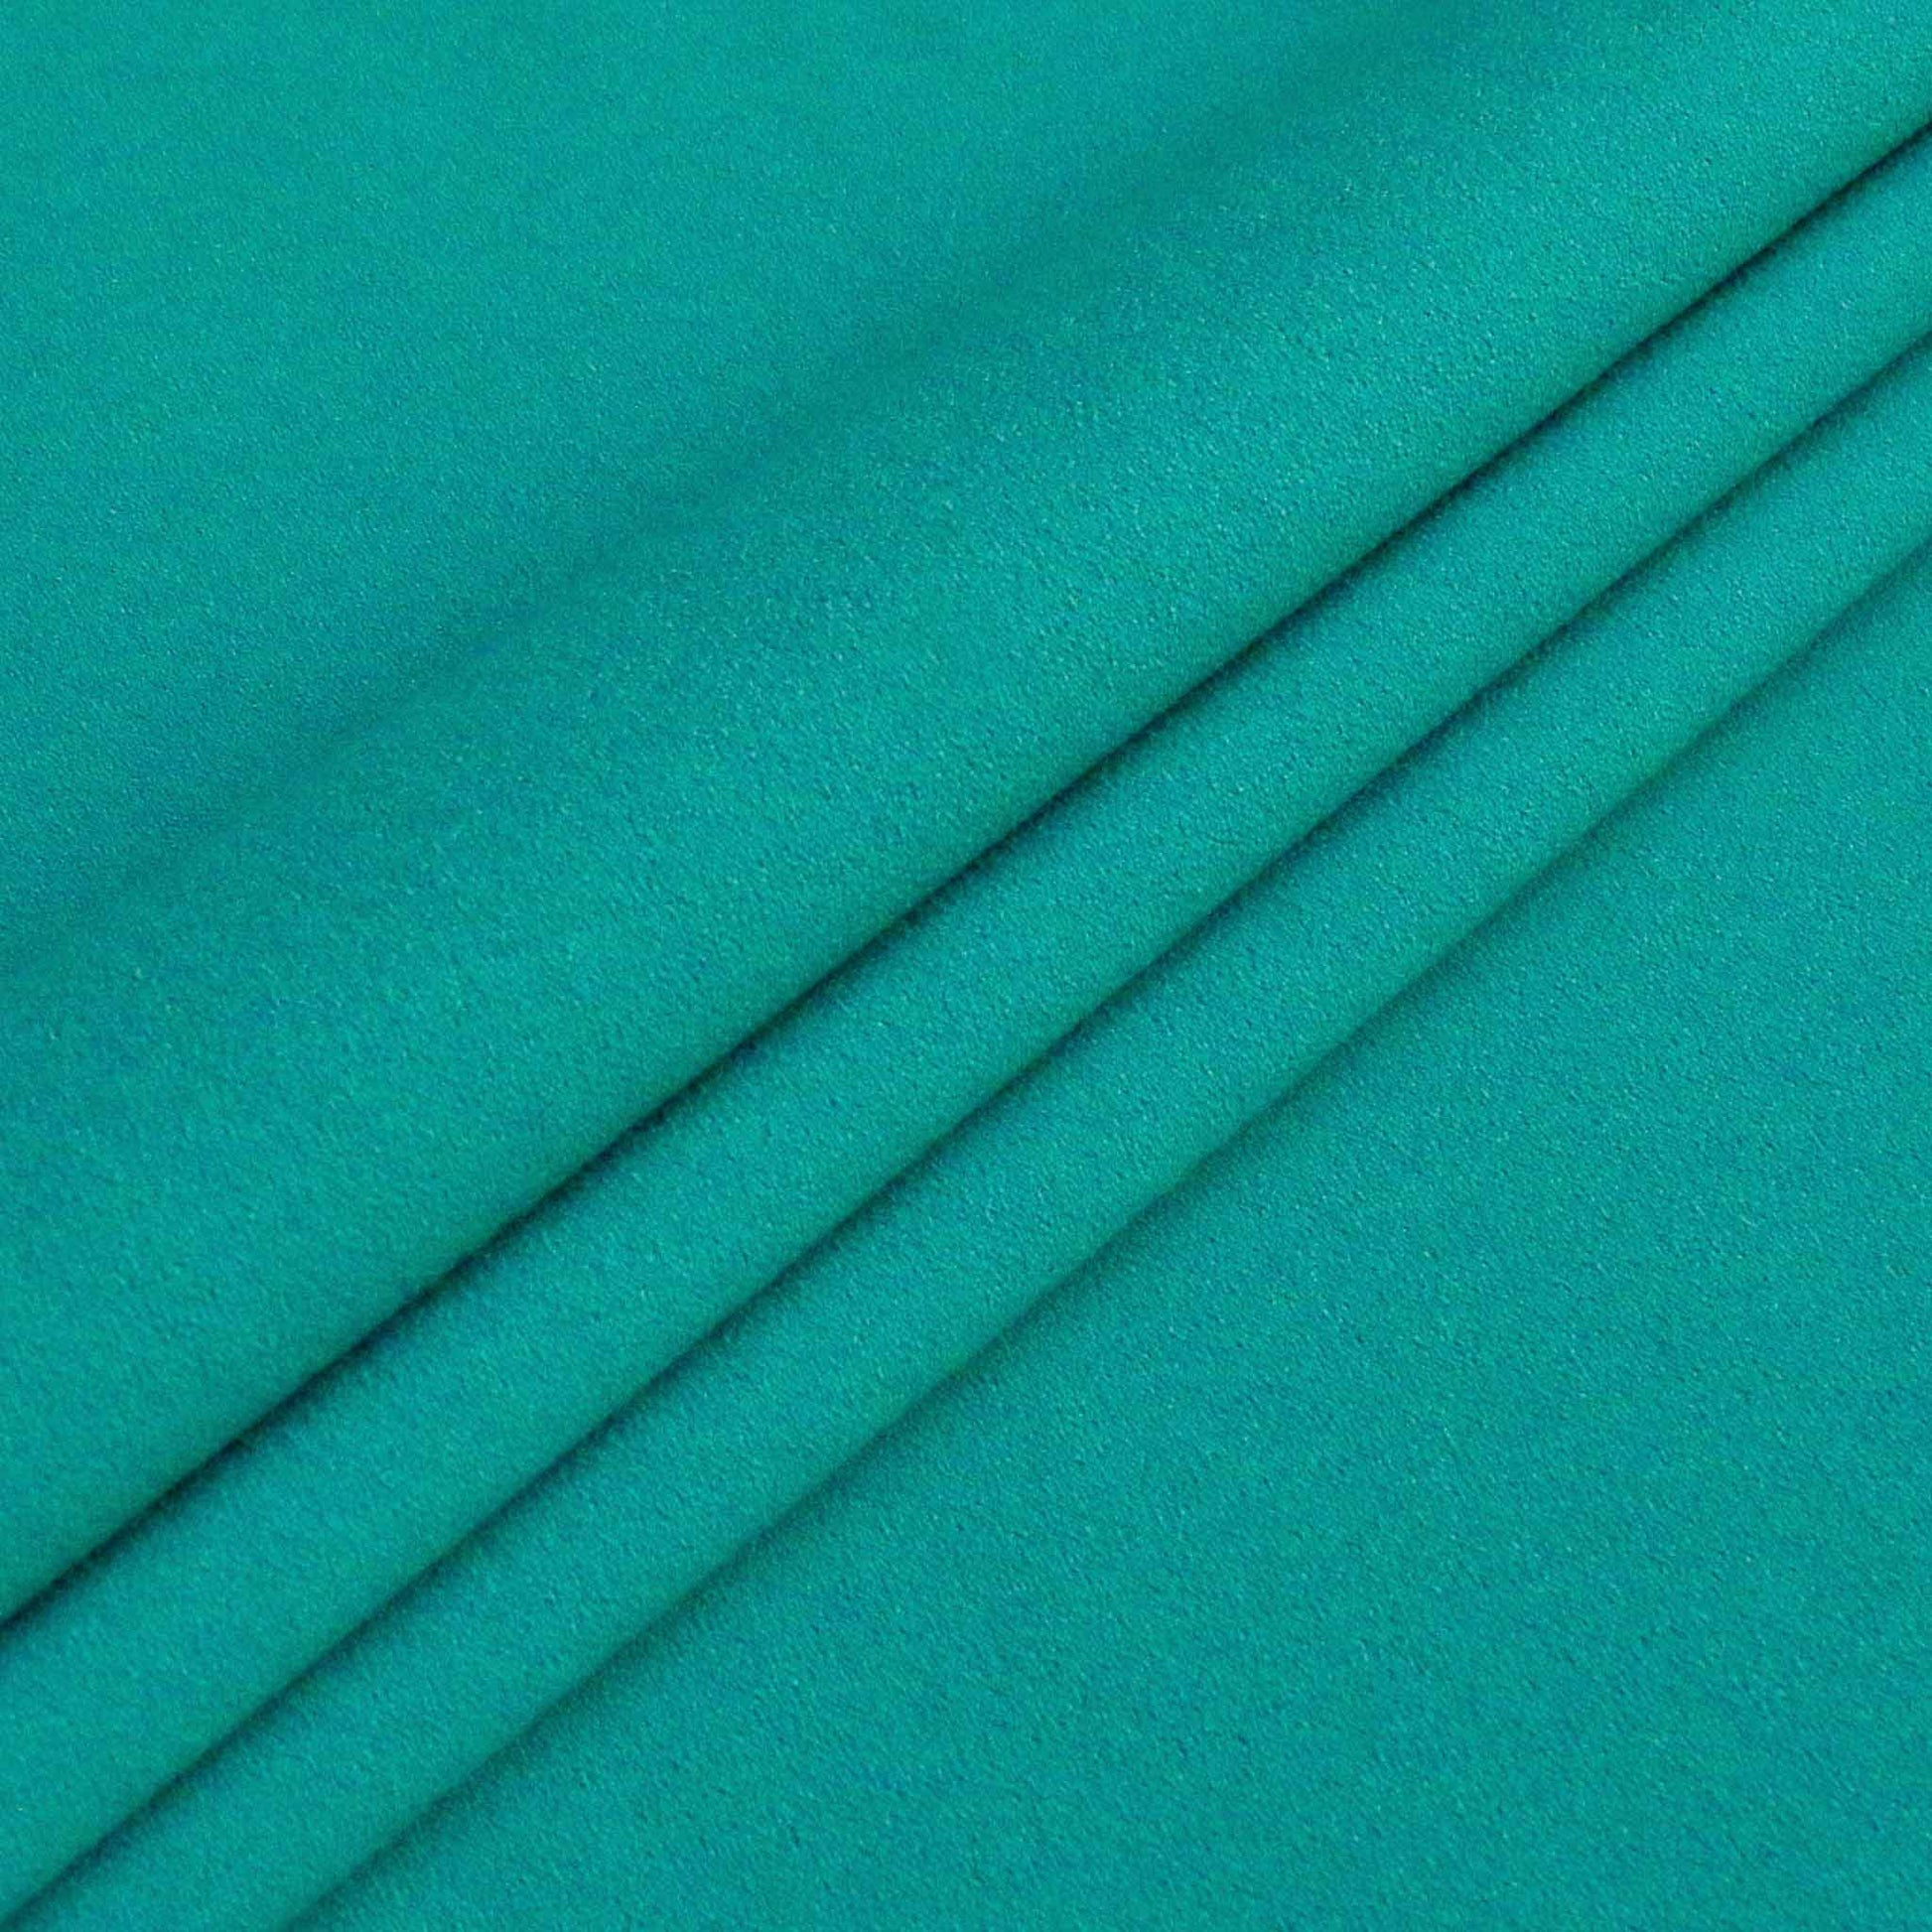 viscose crepe in mint green stretchy dressmaking fabric